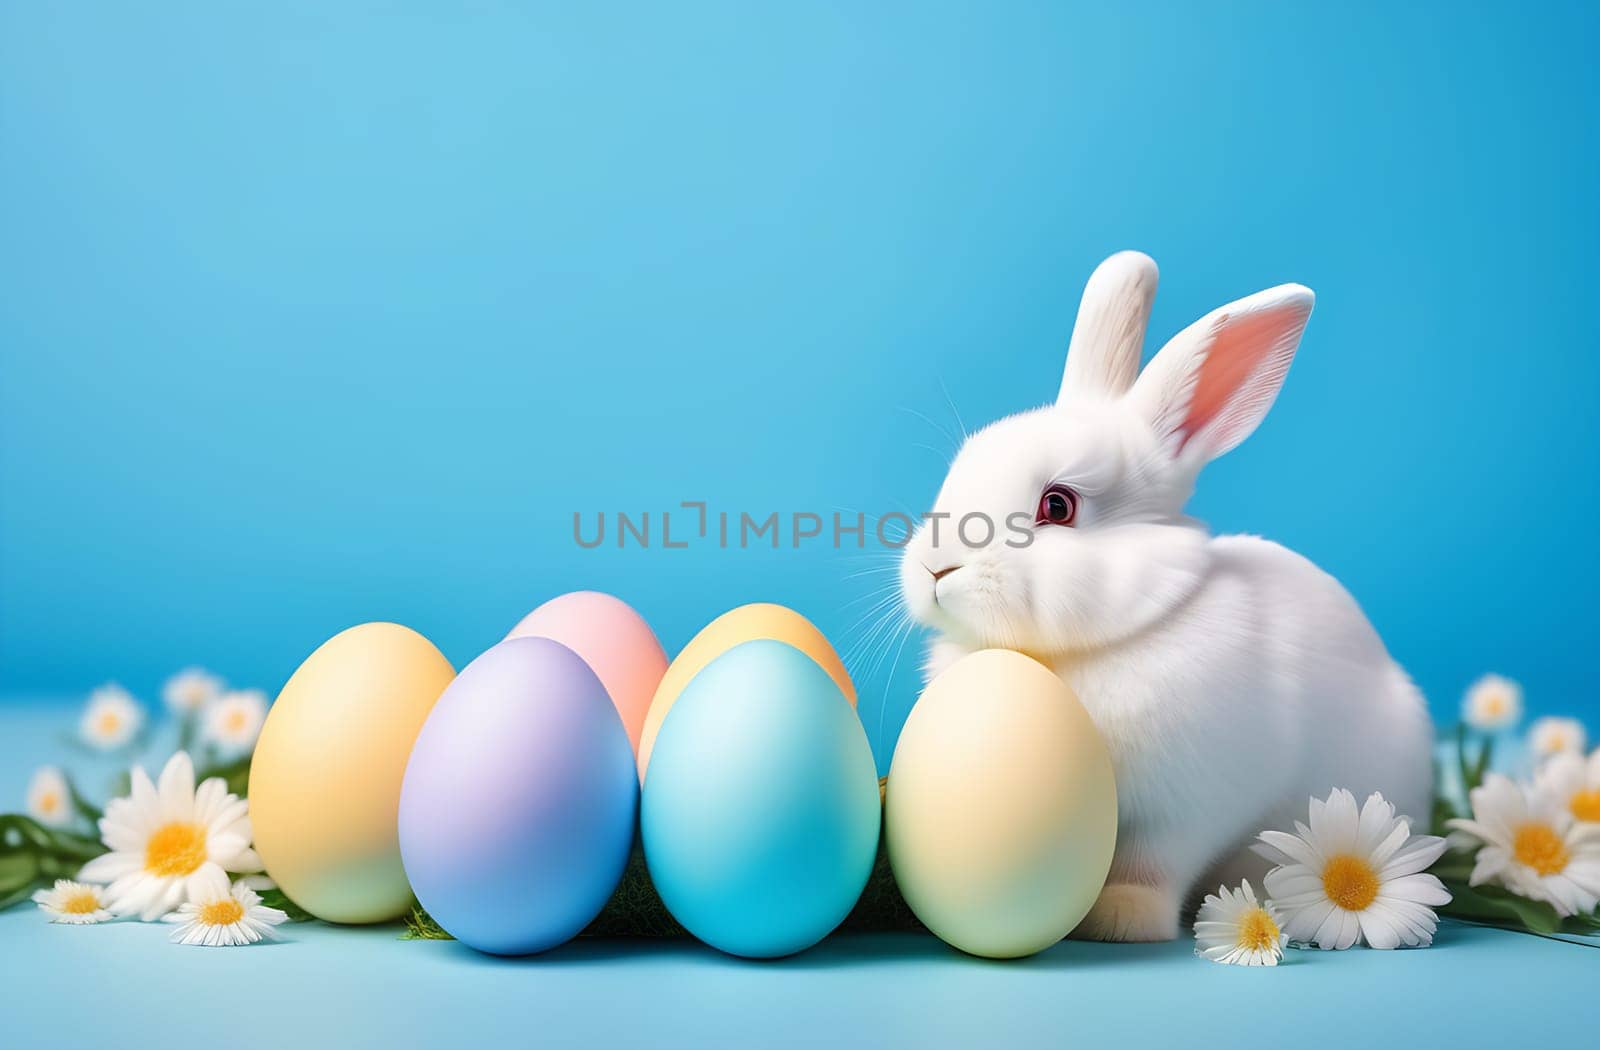 A small white fluffy rabbit sits near colorful Easter eggs and flowers on a blue background.